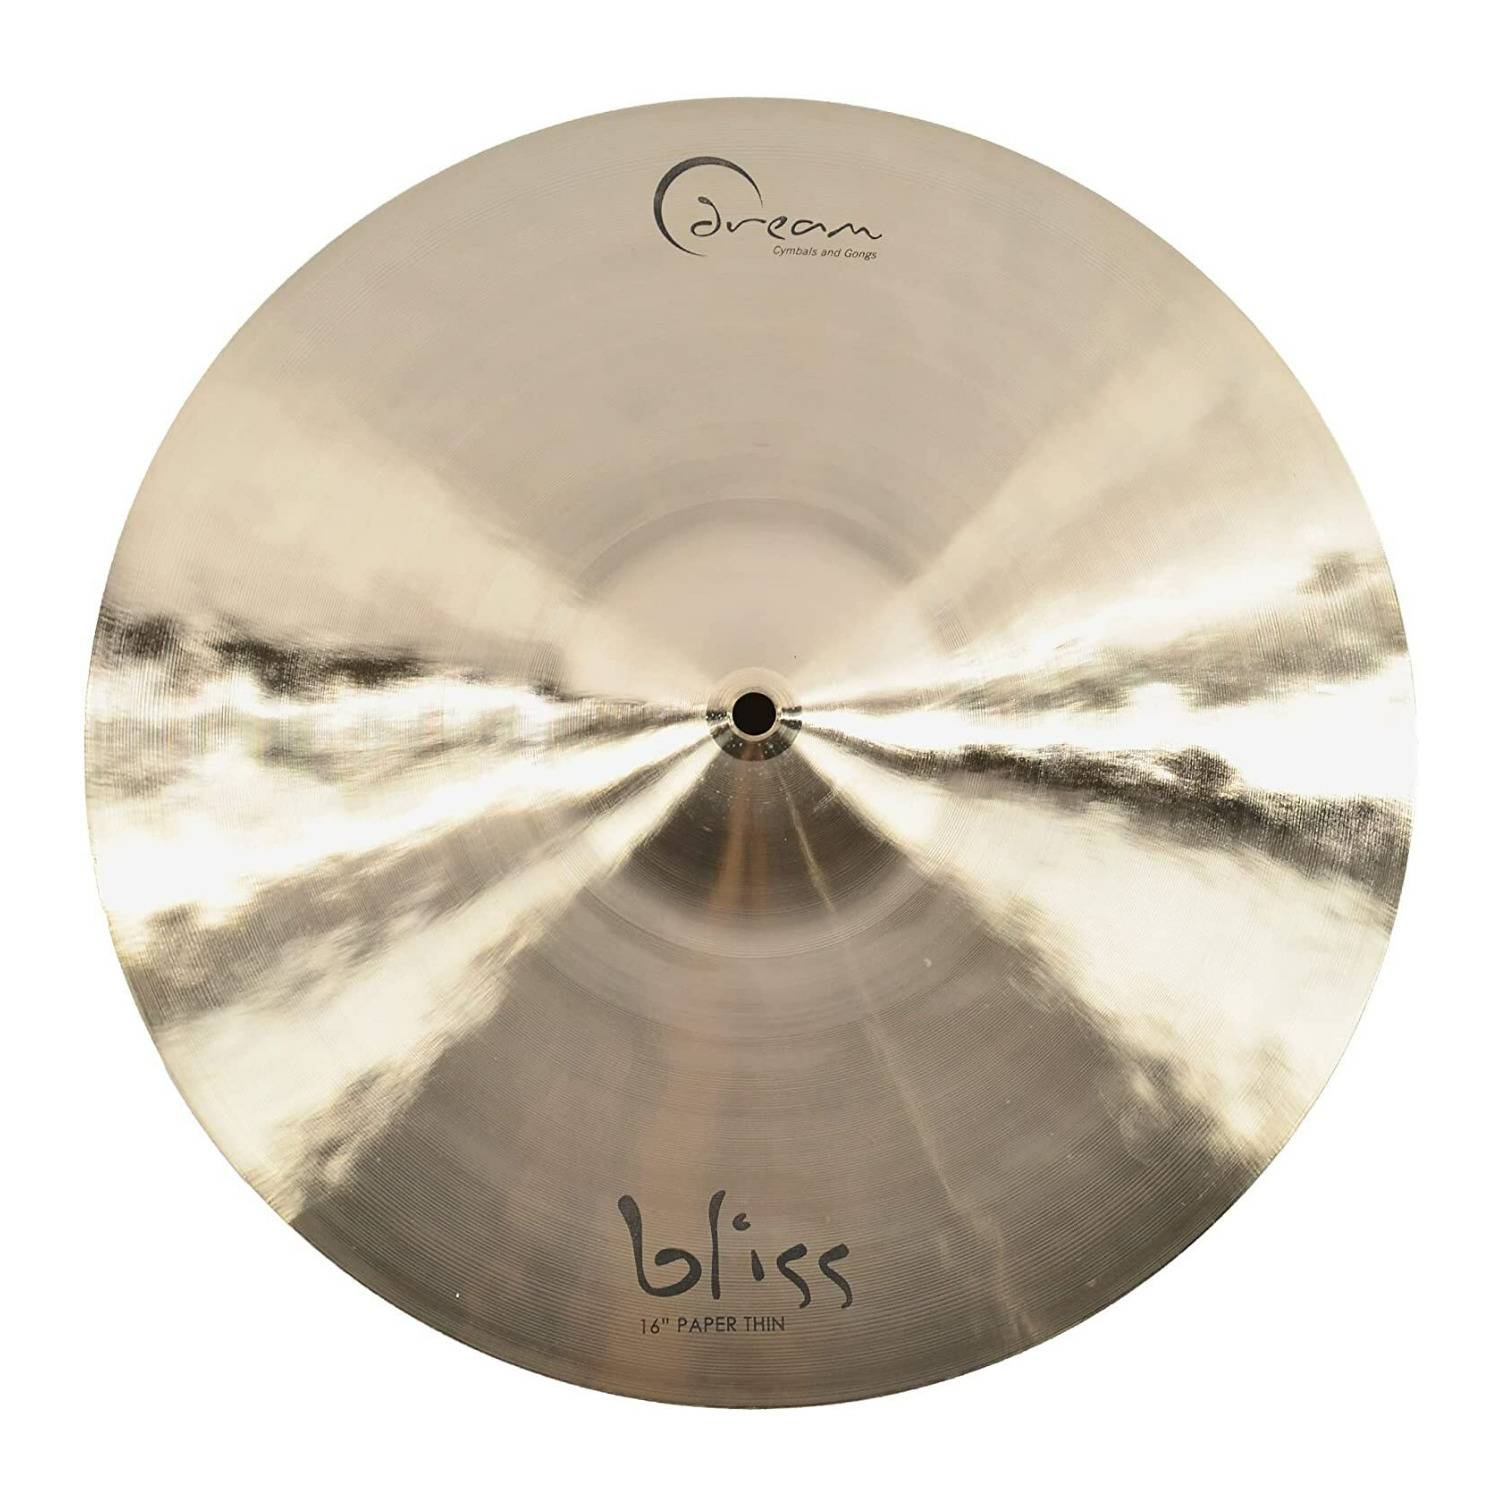 Dream Bliss 16-Inch Paper Thin Crash, Dark Undertones, Hand Forged and Hammered Cymbal